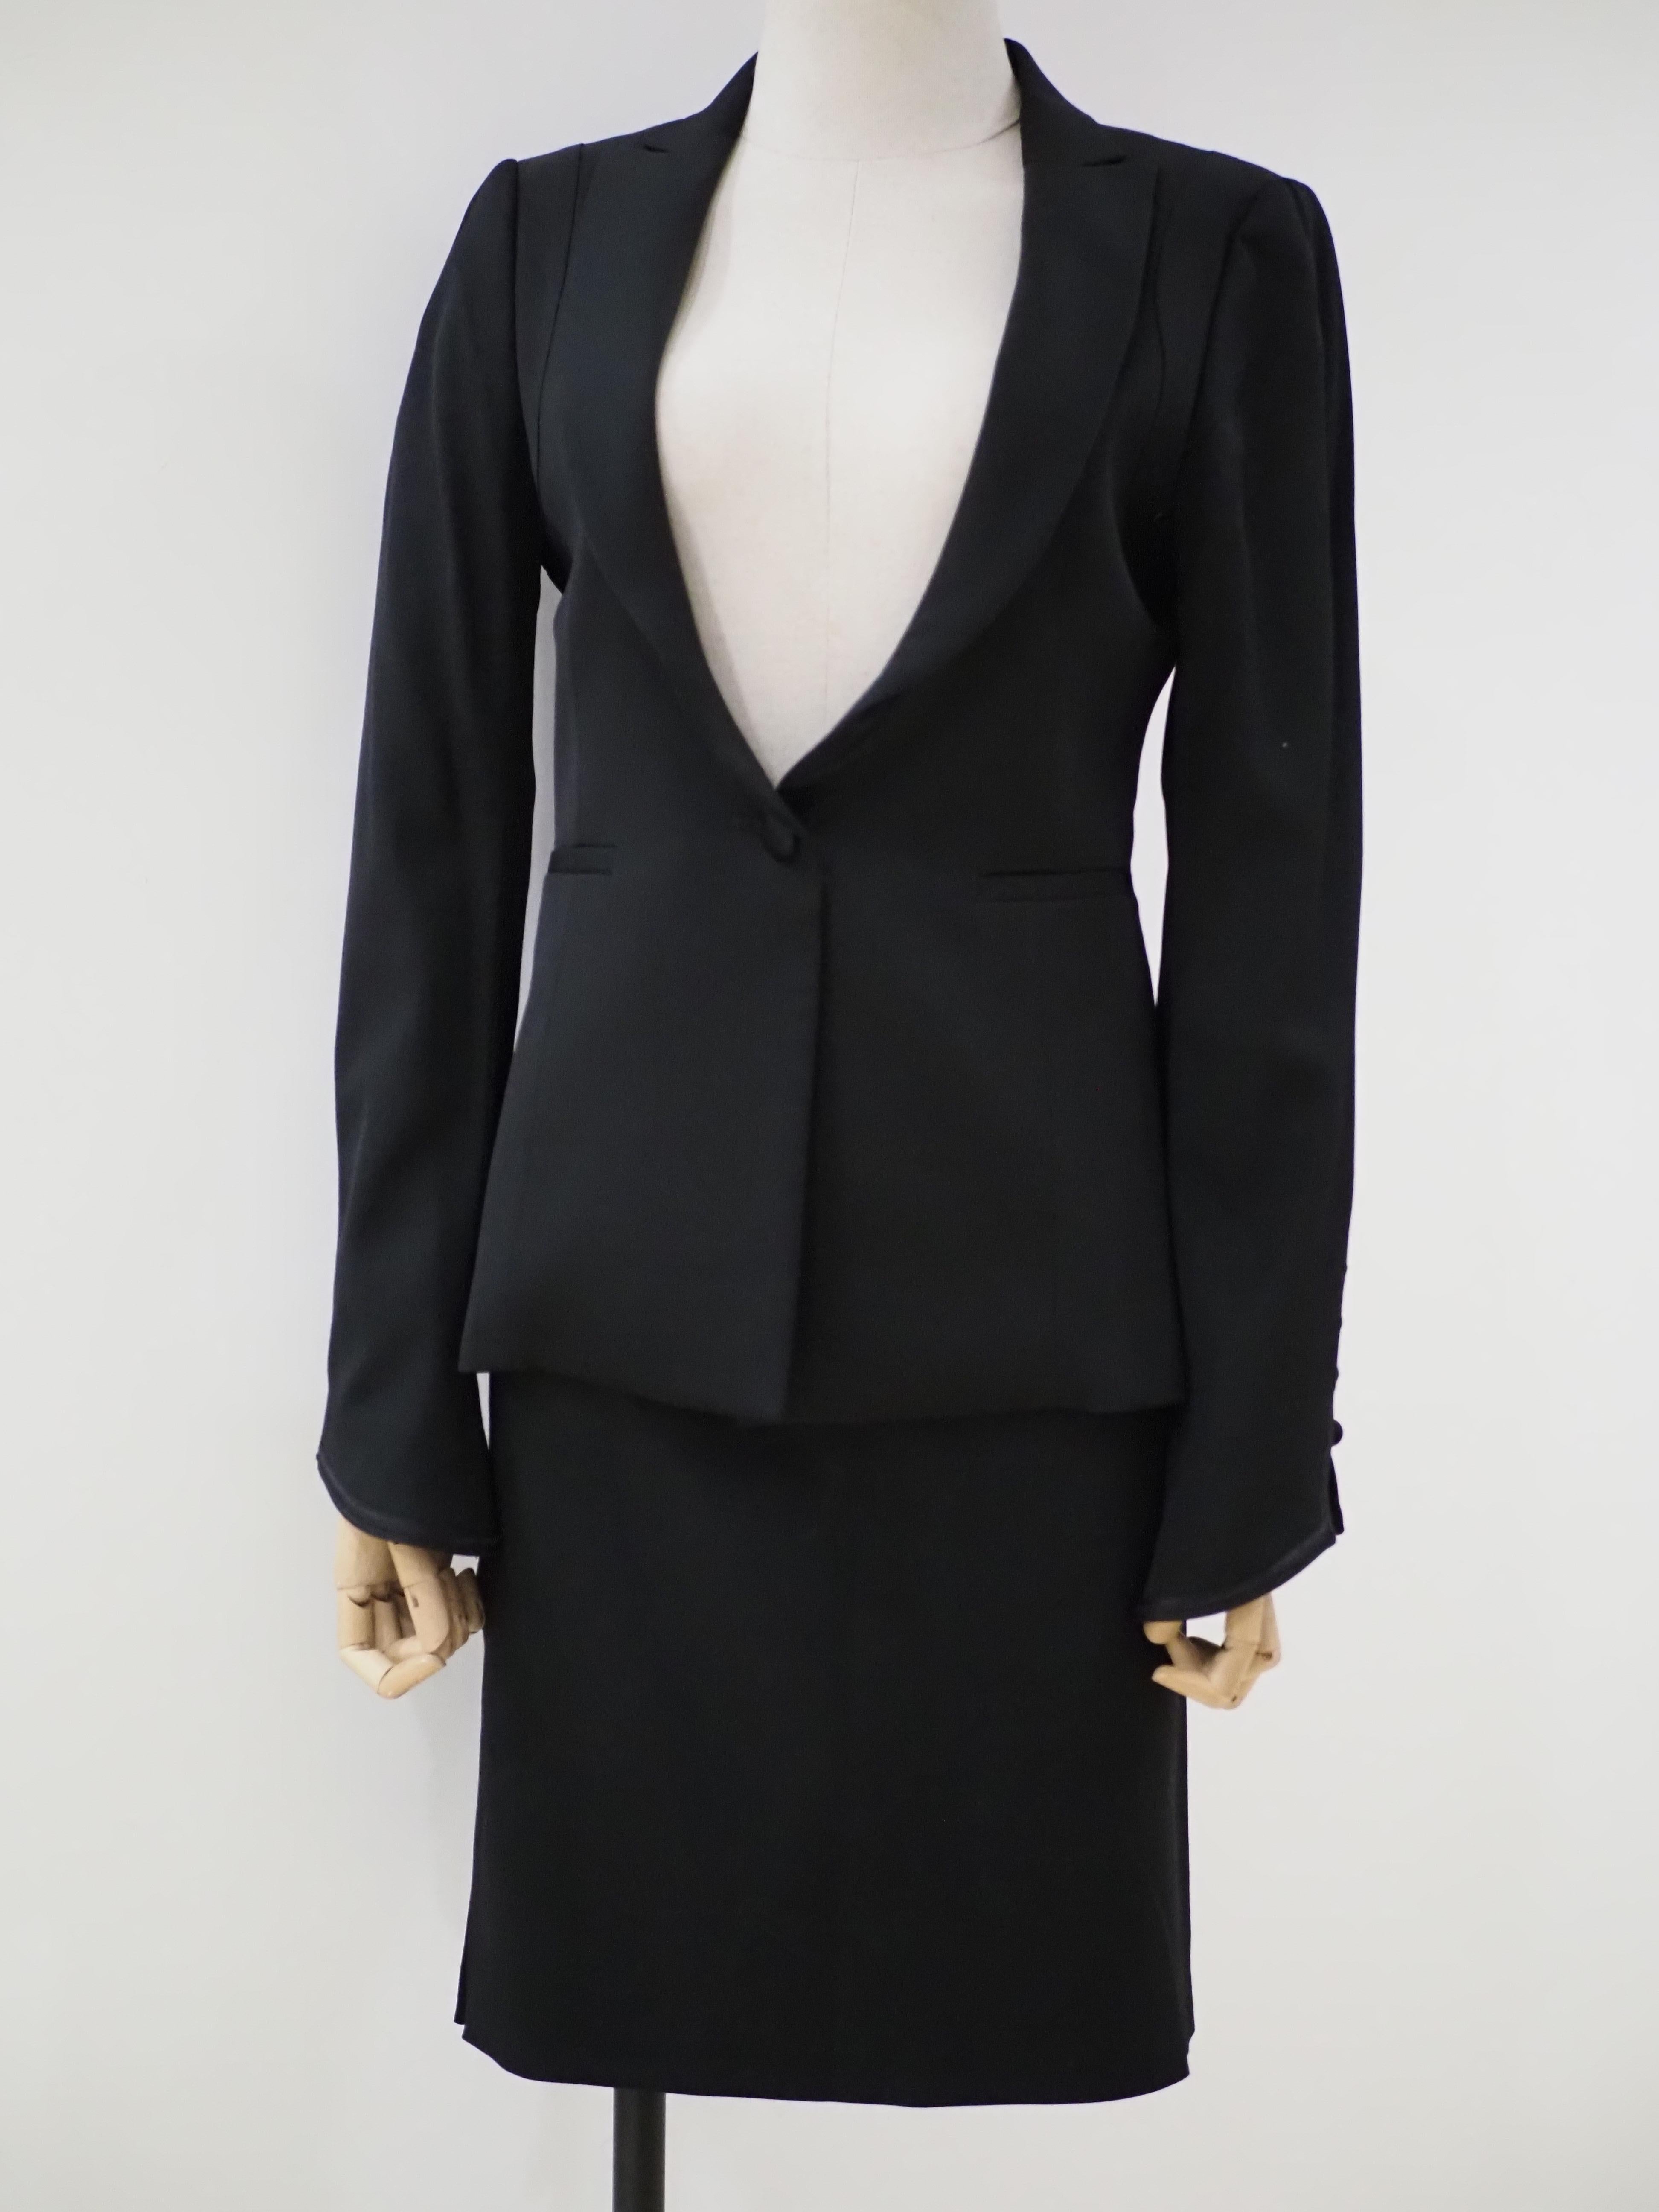 Costume National skirt suit
size 42
